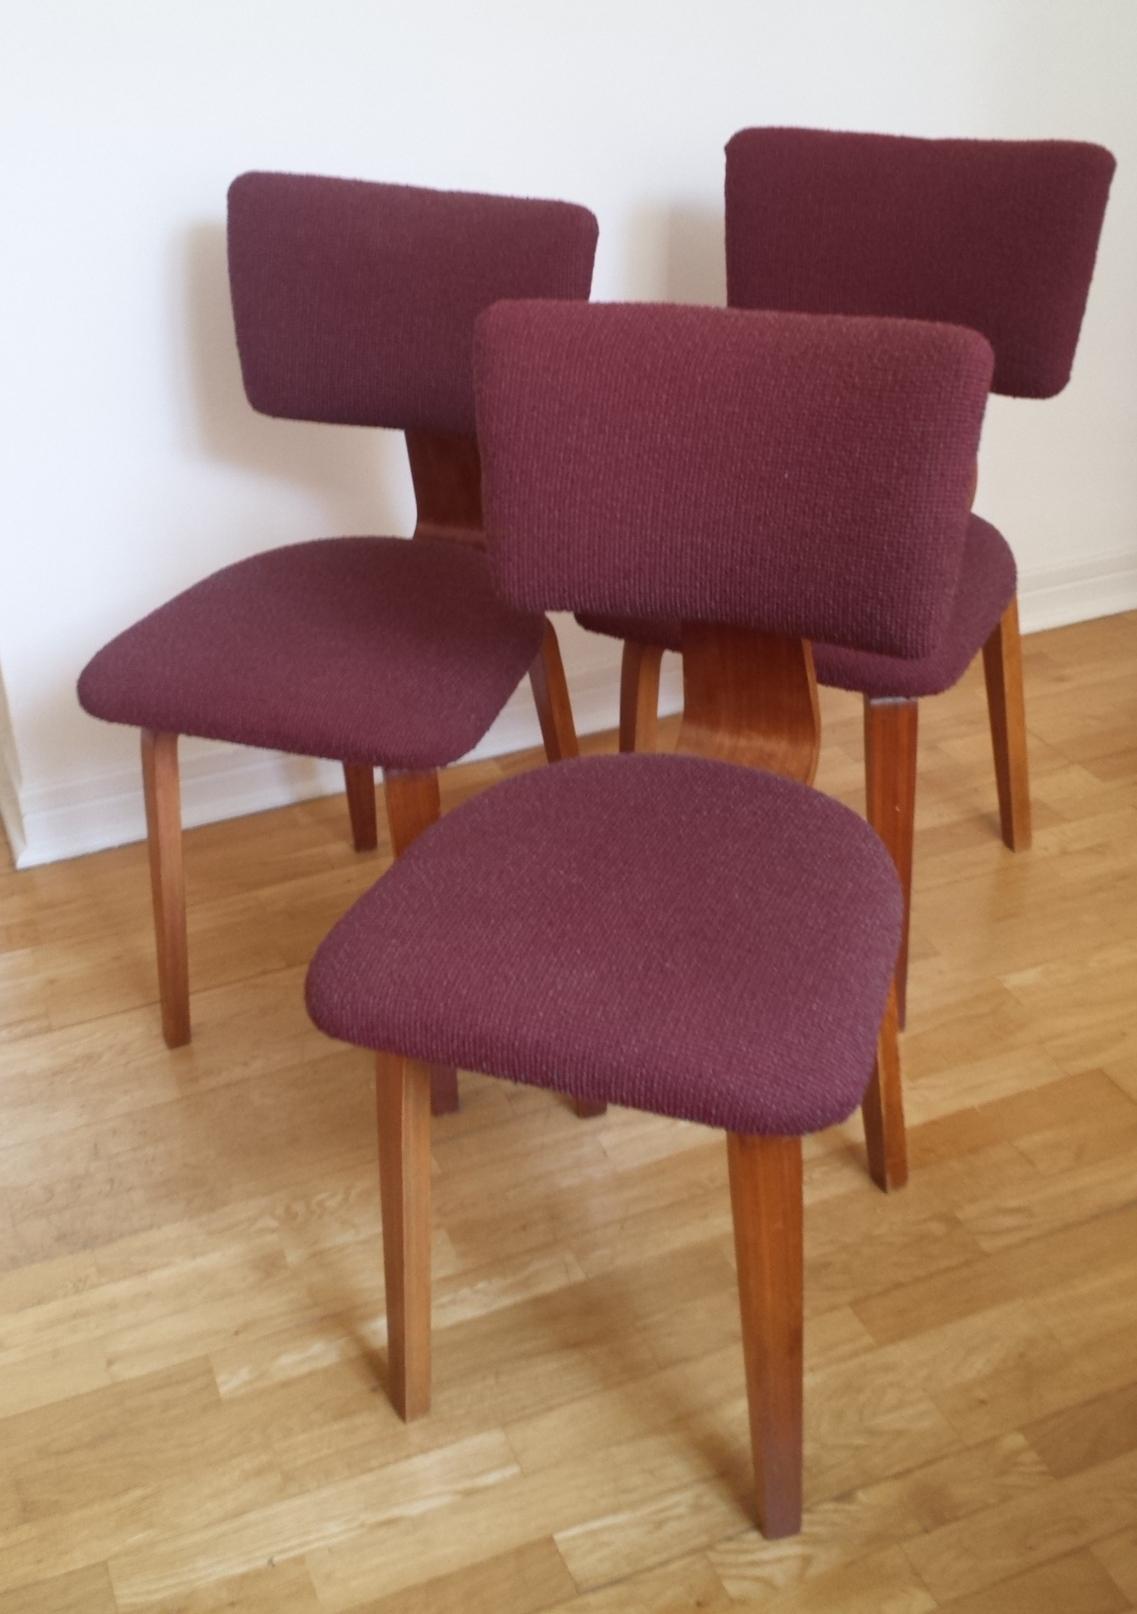 20th Century Four Blond Wood Dining Chairs by Dutch Cor Alons 1950s For Sale